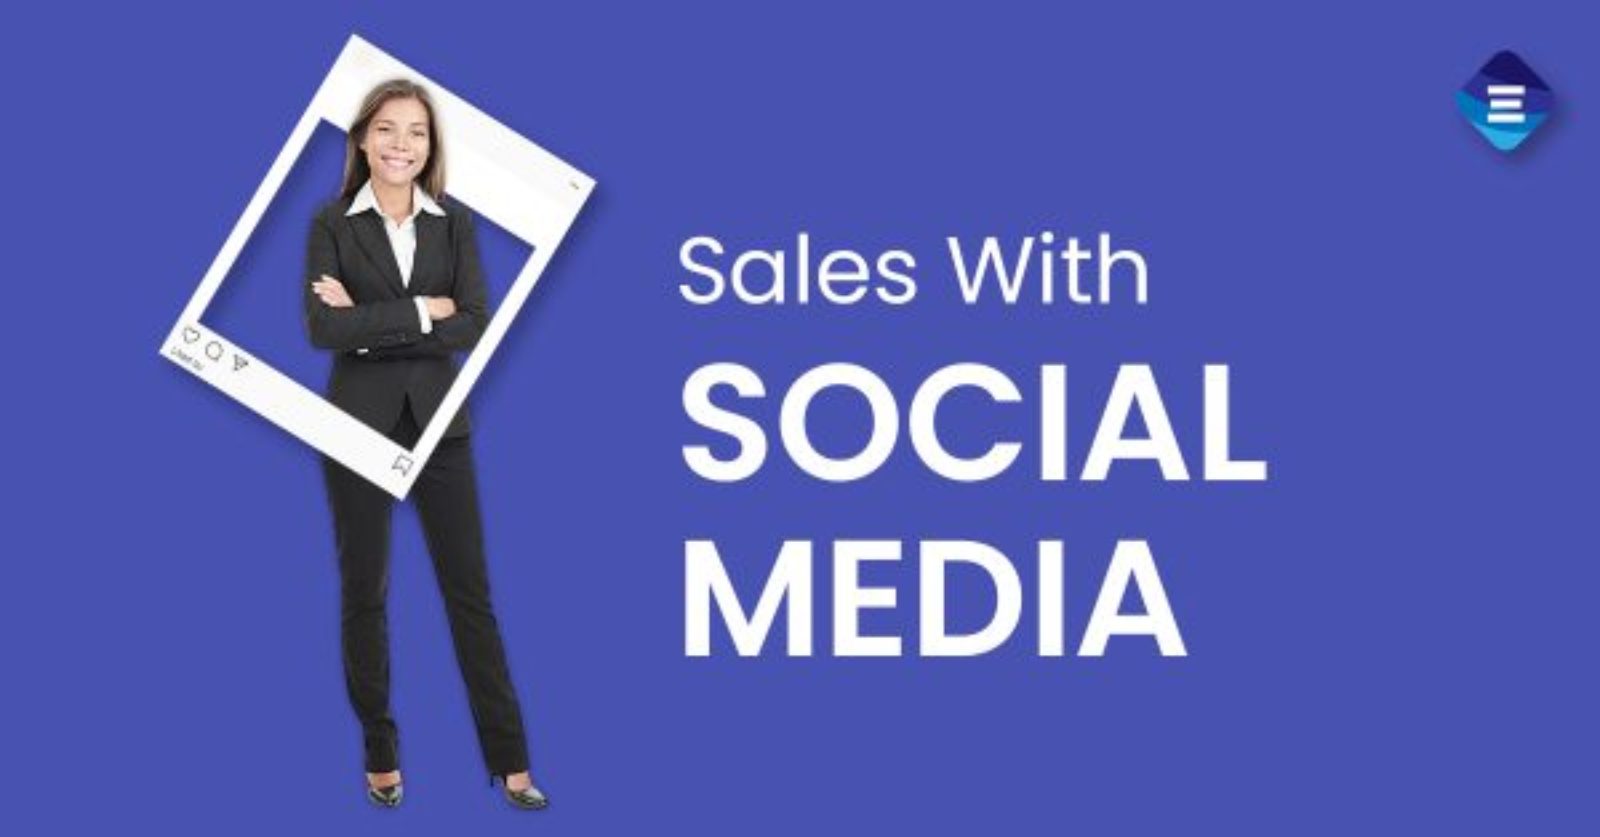 Sales With Social-Media